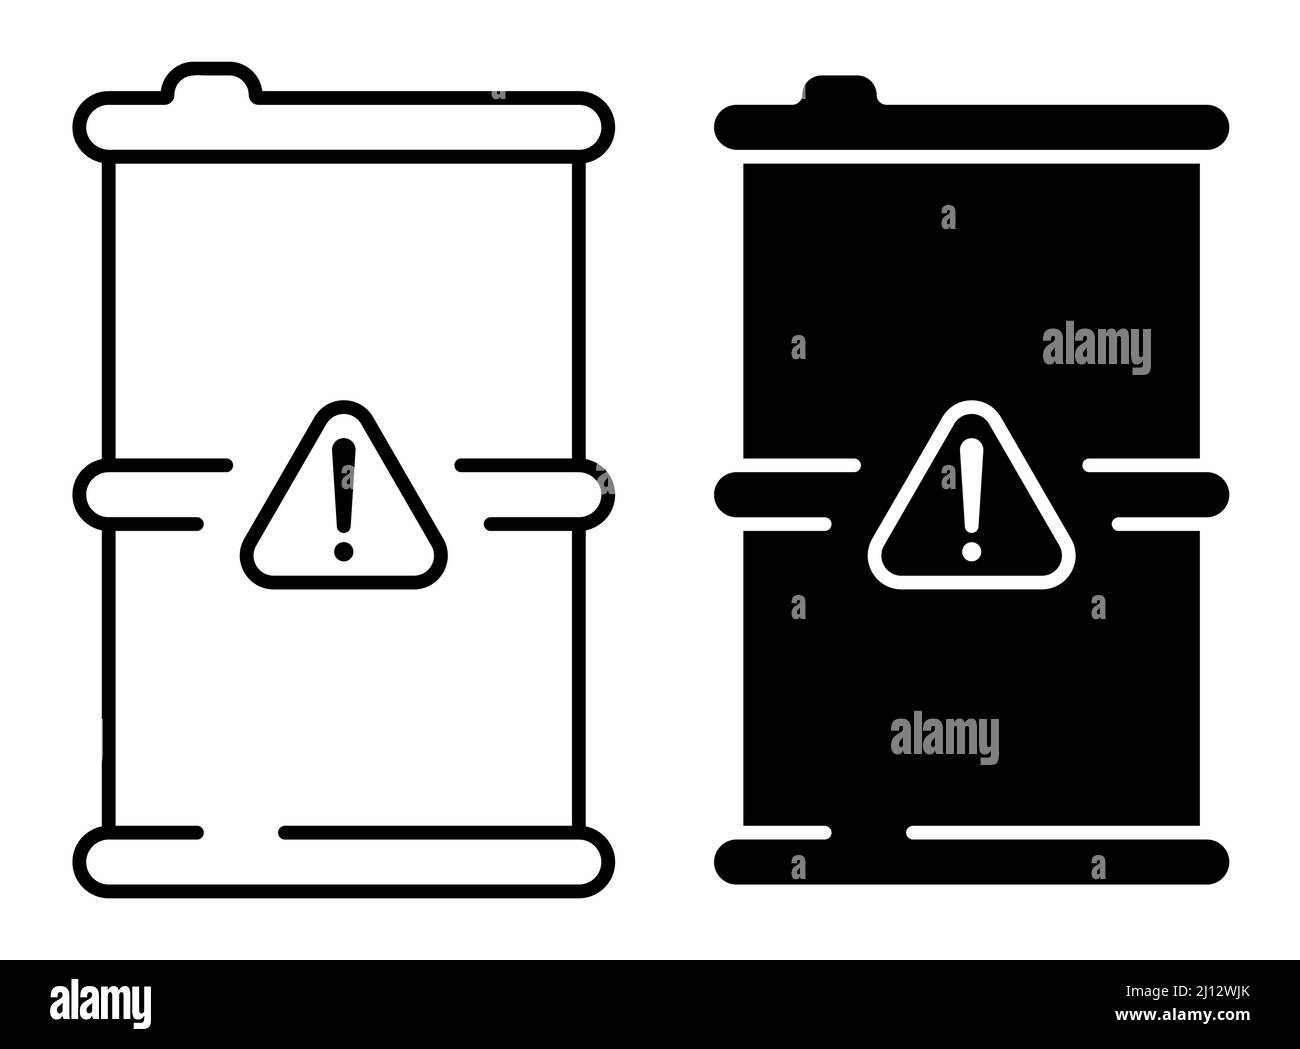 Linear icon, metal barrel with danger sign. Storage and disposal of hazardous substances. Simple black and white vector isolated on white background Stock Vector